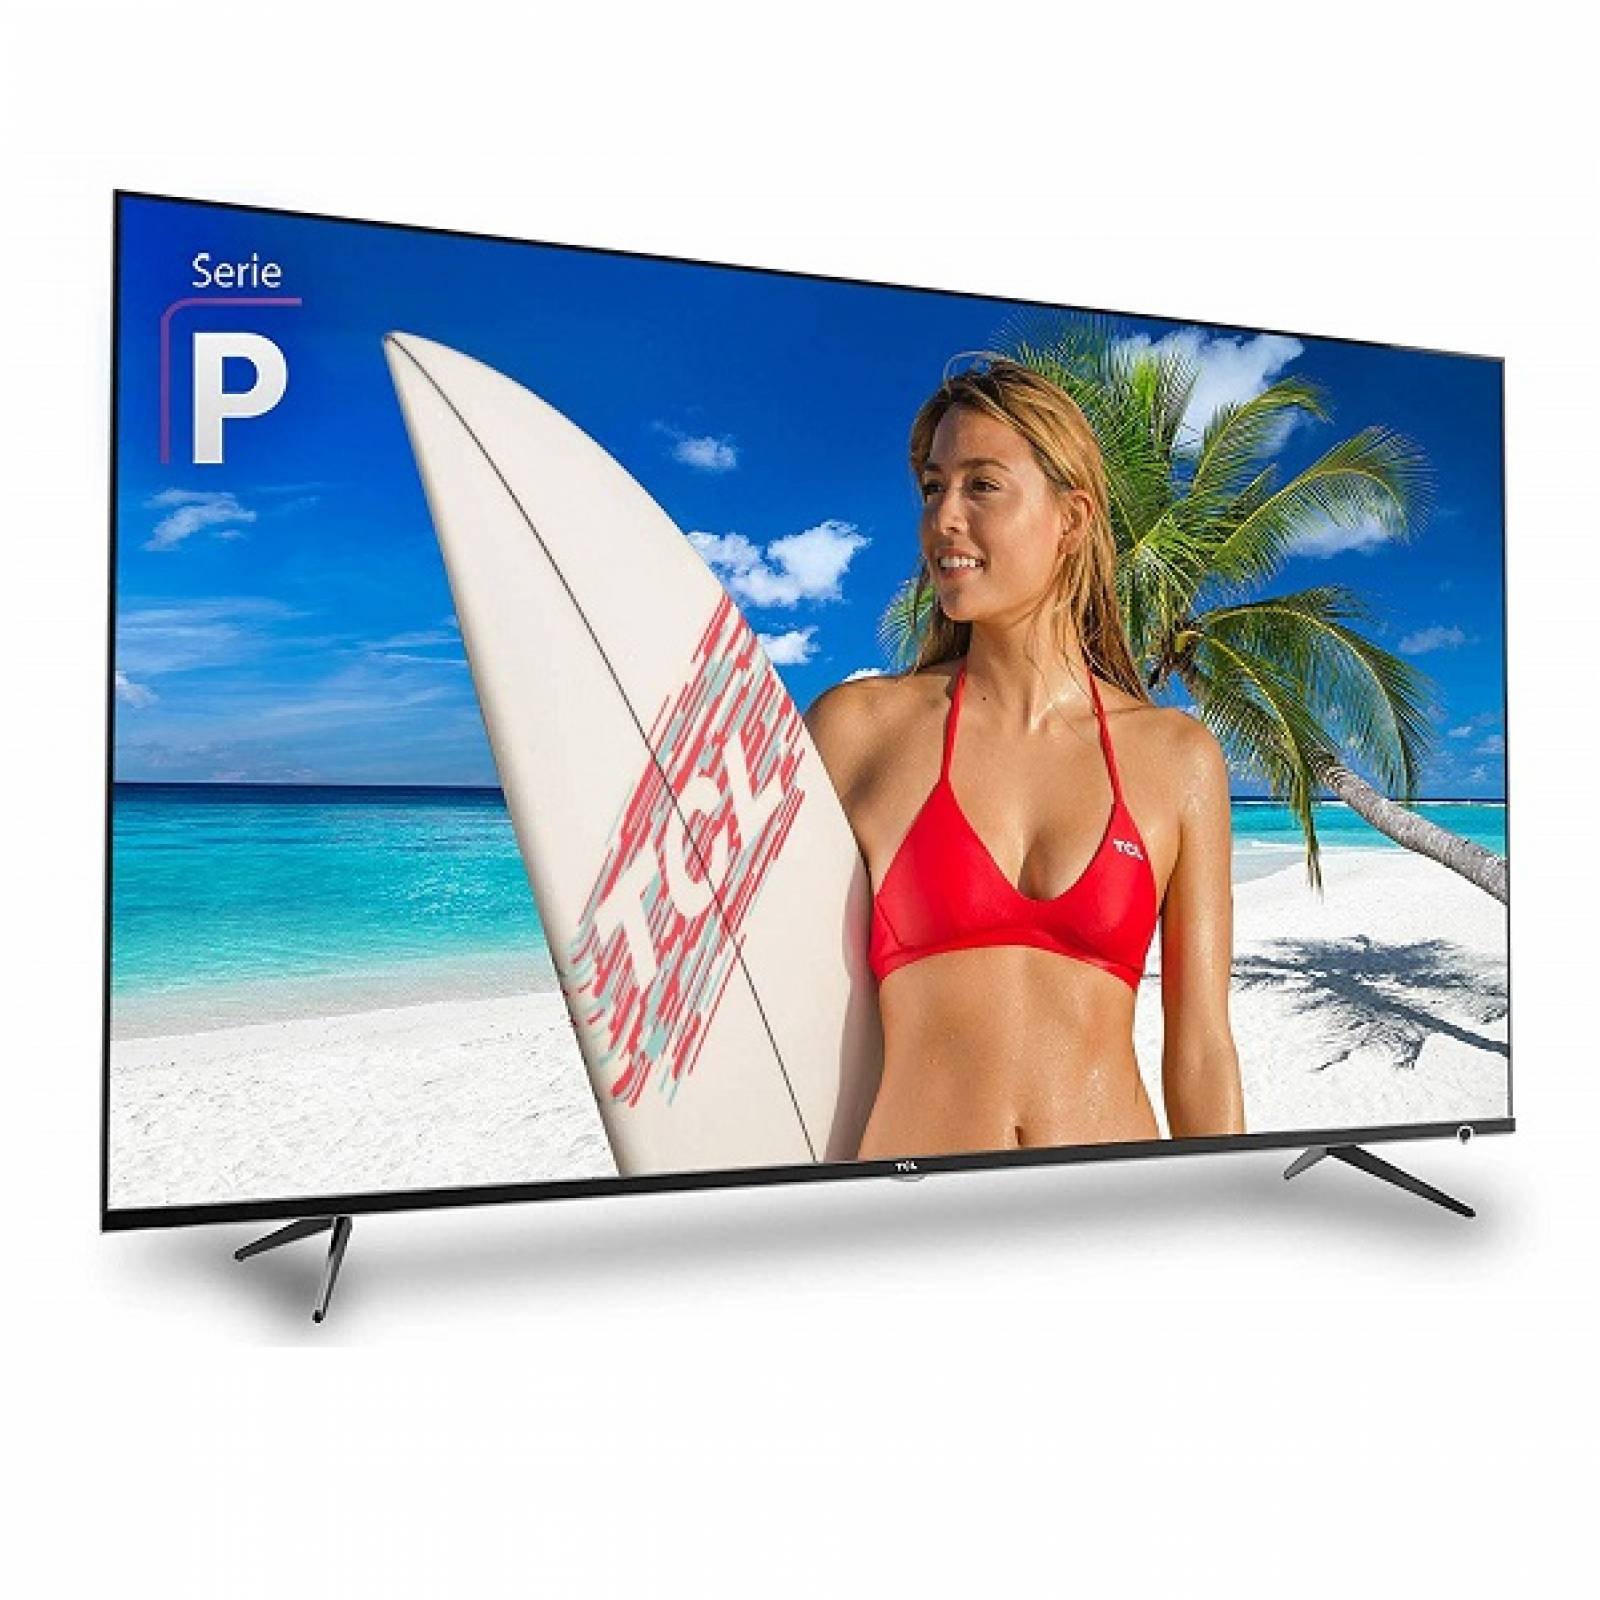 Smart TV TCL Dolby digital audio HDR HDMI USB 49P612